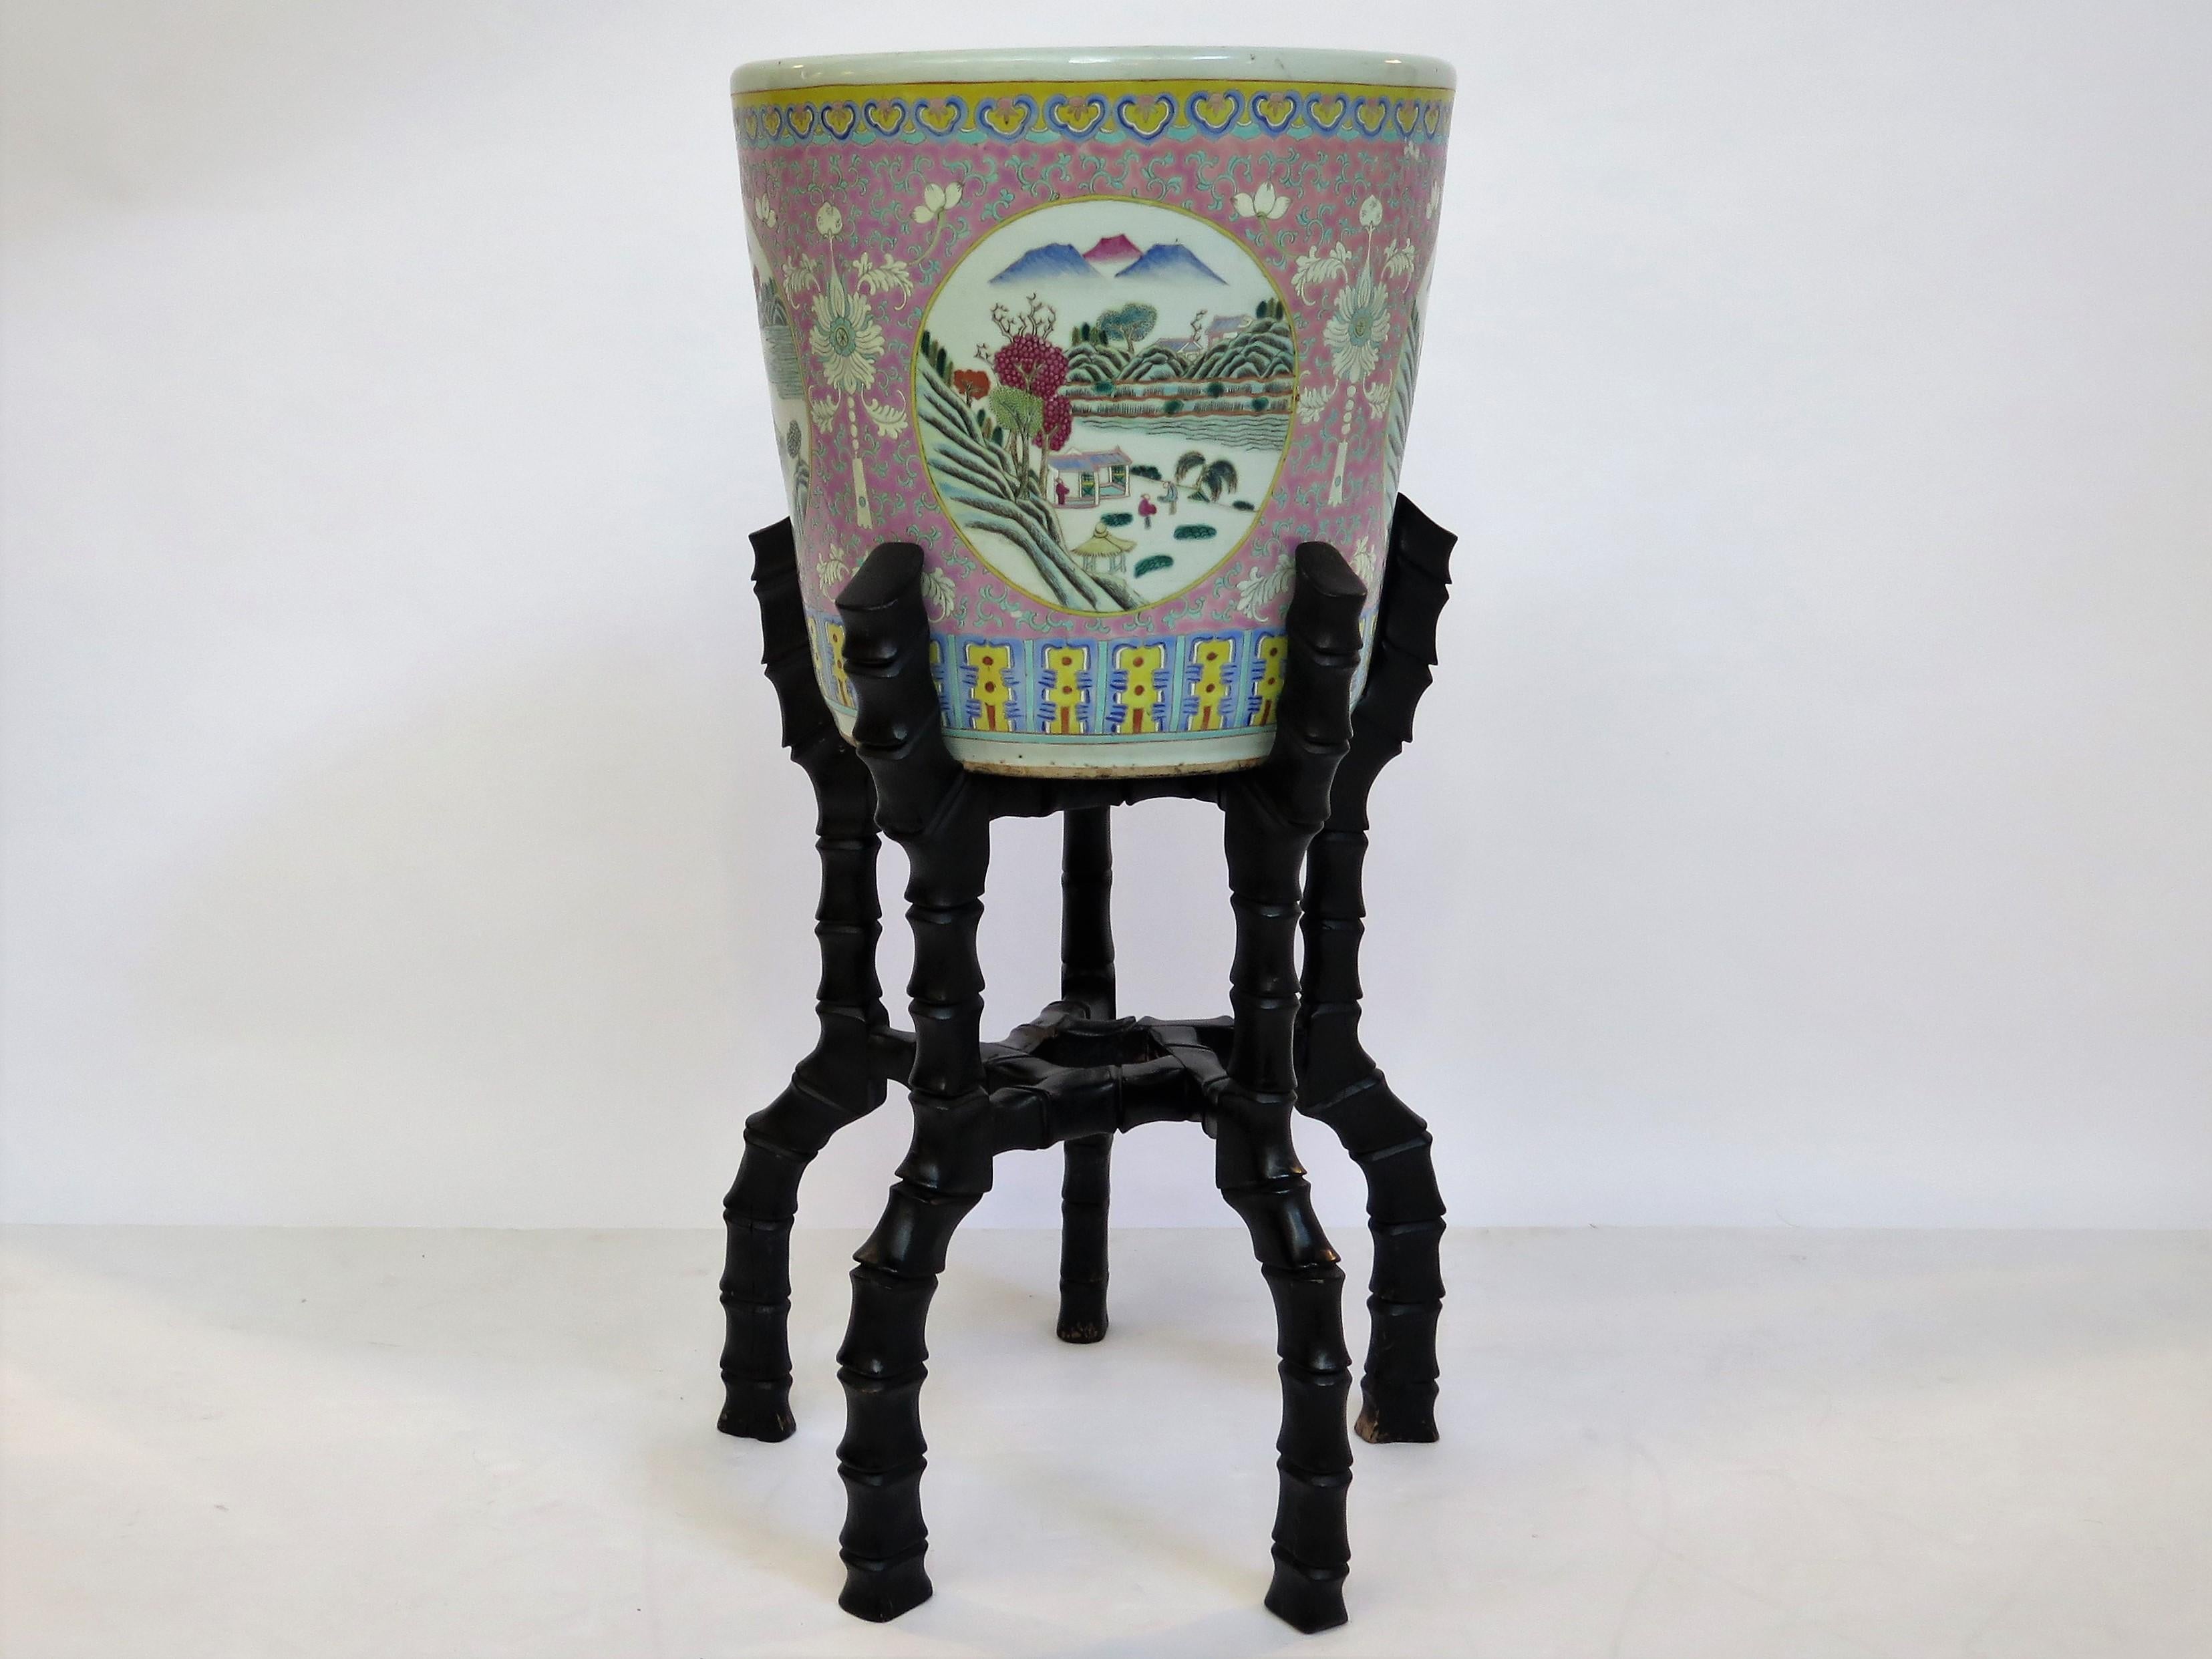 Beautiful large Chinese enameled porcelain jardiniere with carved wooden stand. Jardiniere features a white background with four round medallions depicting country life scenes. Decoration all around the lip of the jardiniere. Stamped CHINA on the